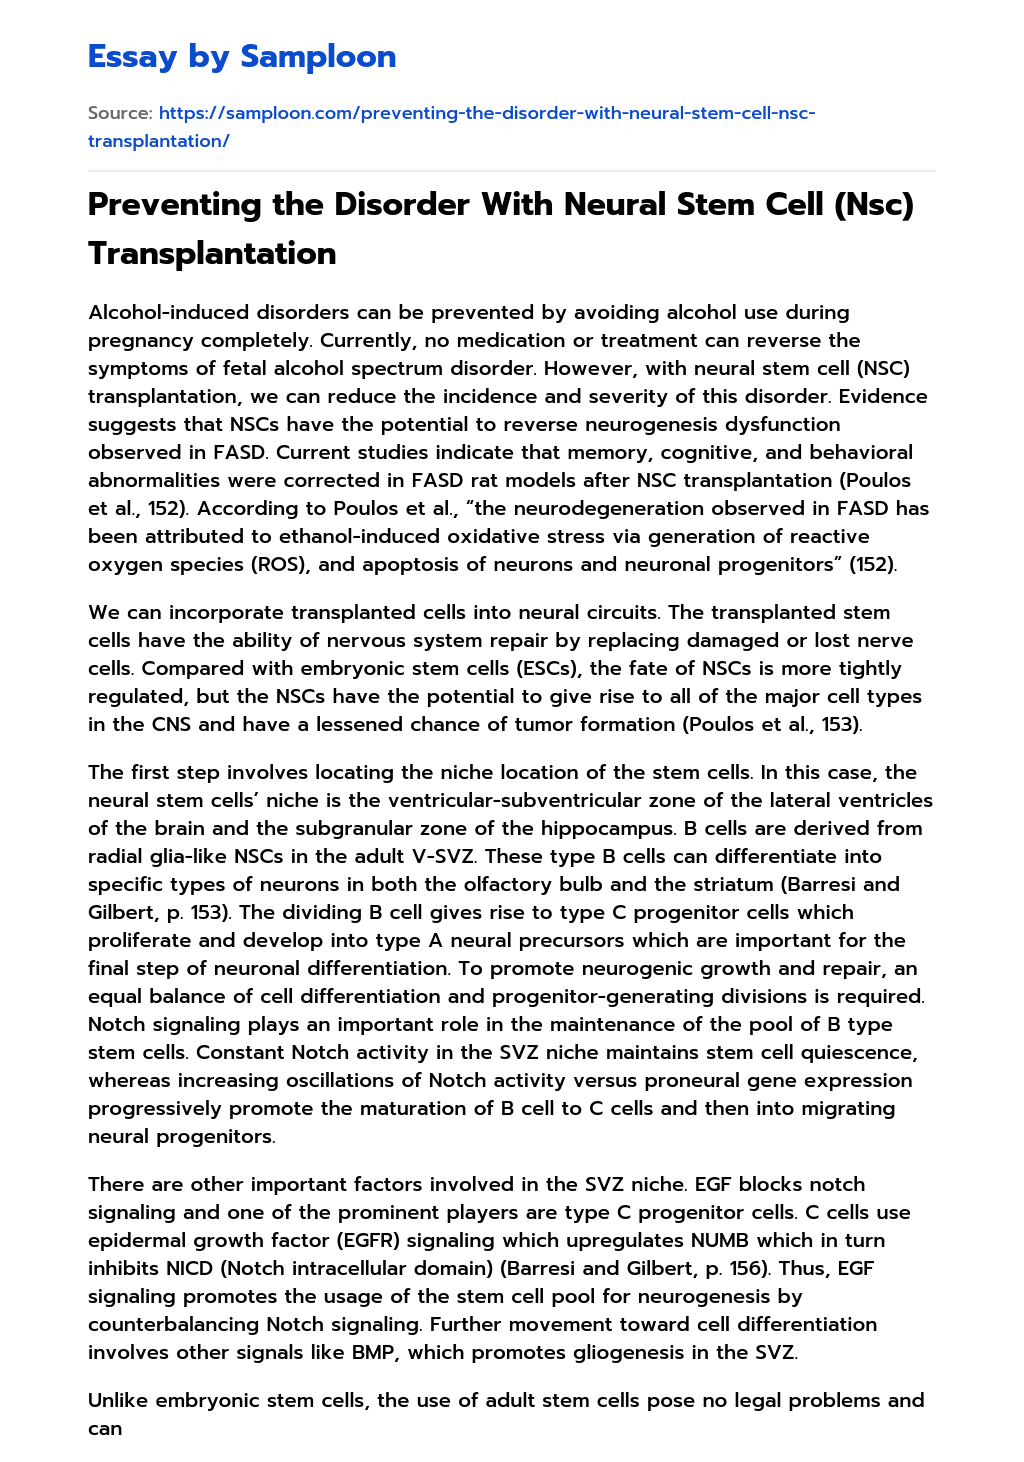 Preventing the Disorder With Neural Stem Cell (Nsc) Transplantation essay